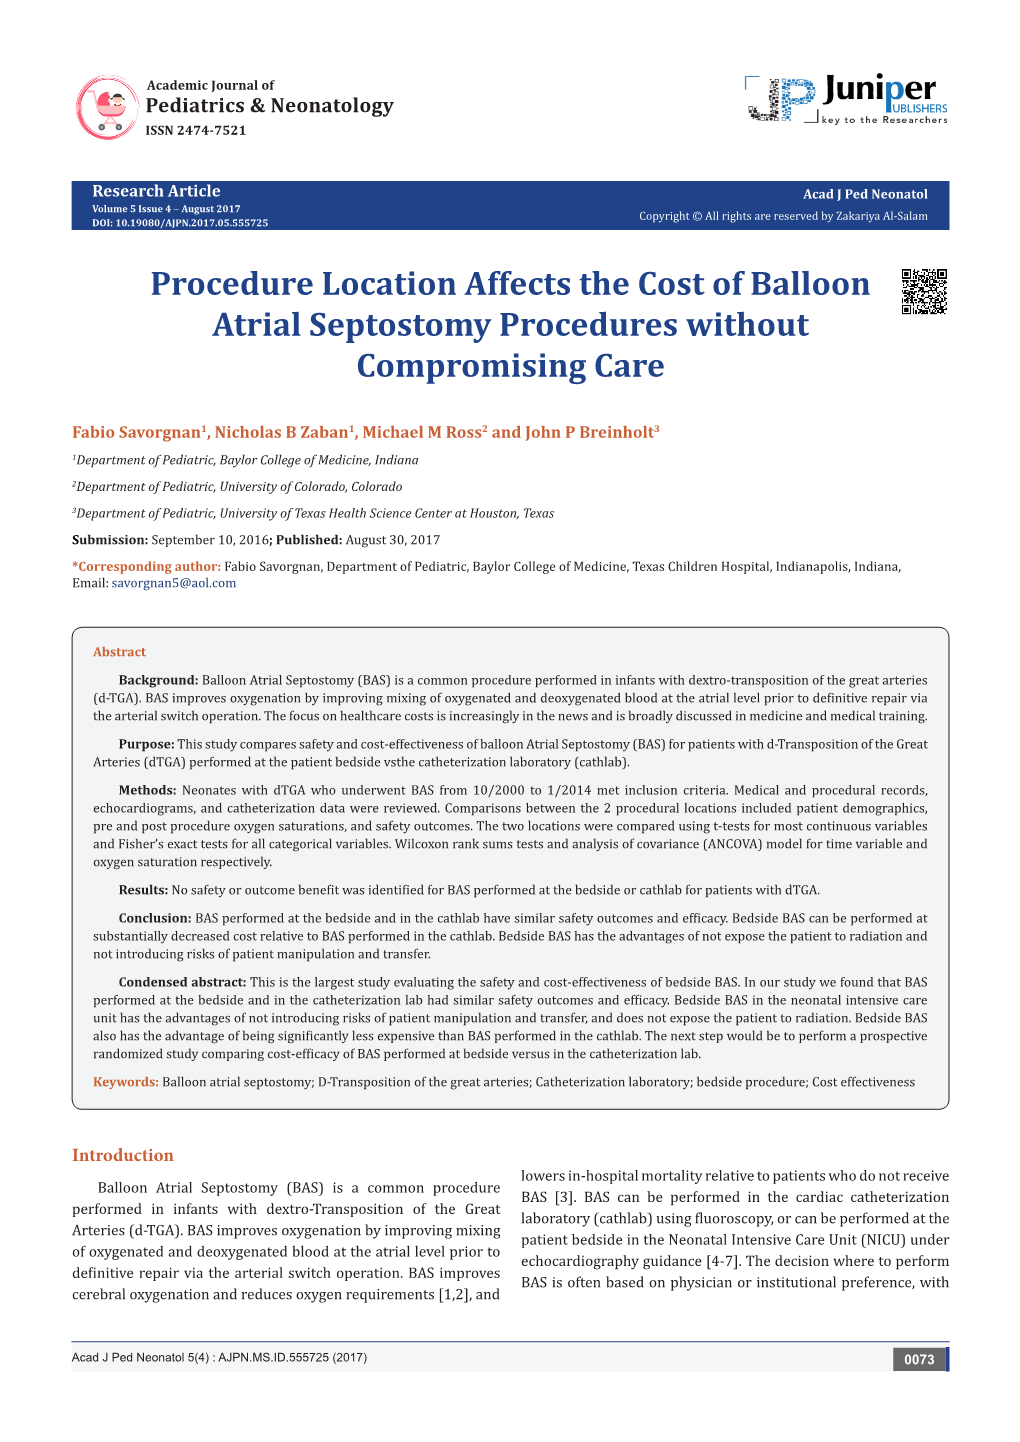 Procedure Location Affects the Cost of Balloon Atrial Septostomy Procedures Without Compromising Care